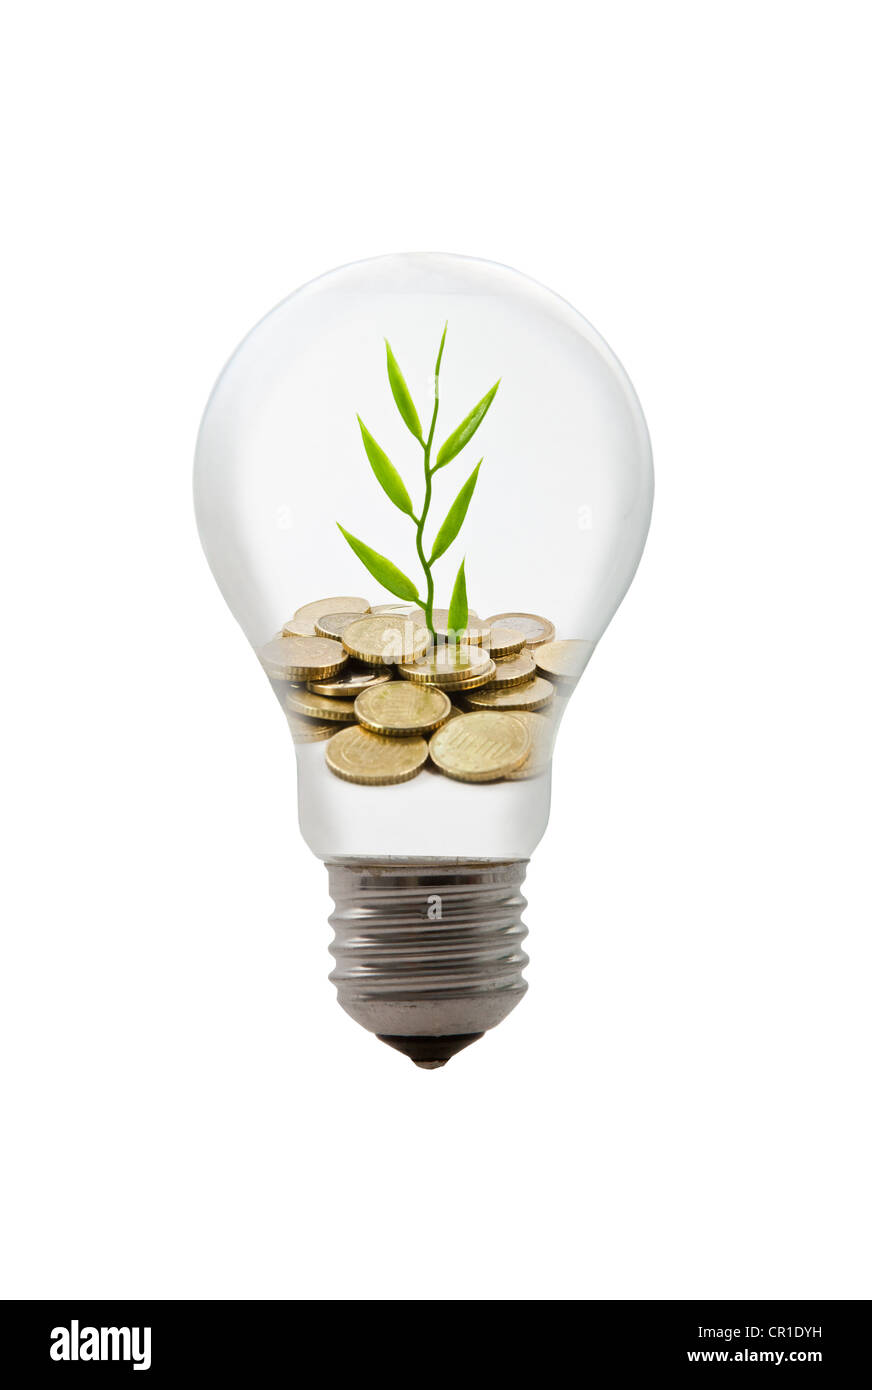 Light bulb filled with coins and a growing plant, symbolic image Stock Photo